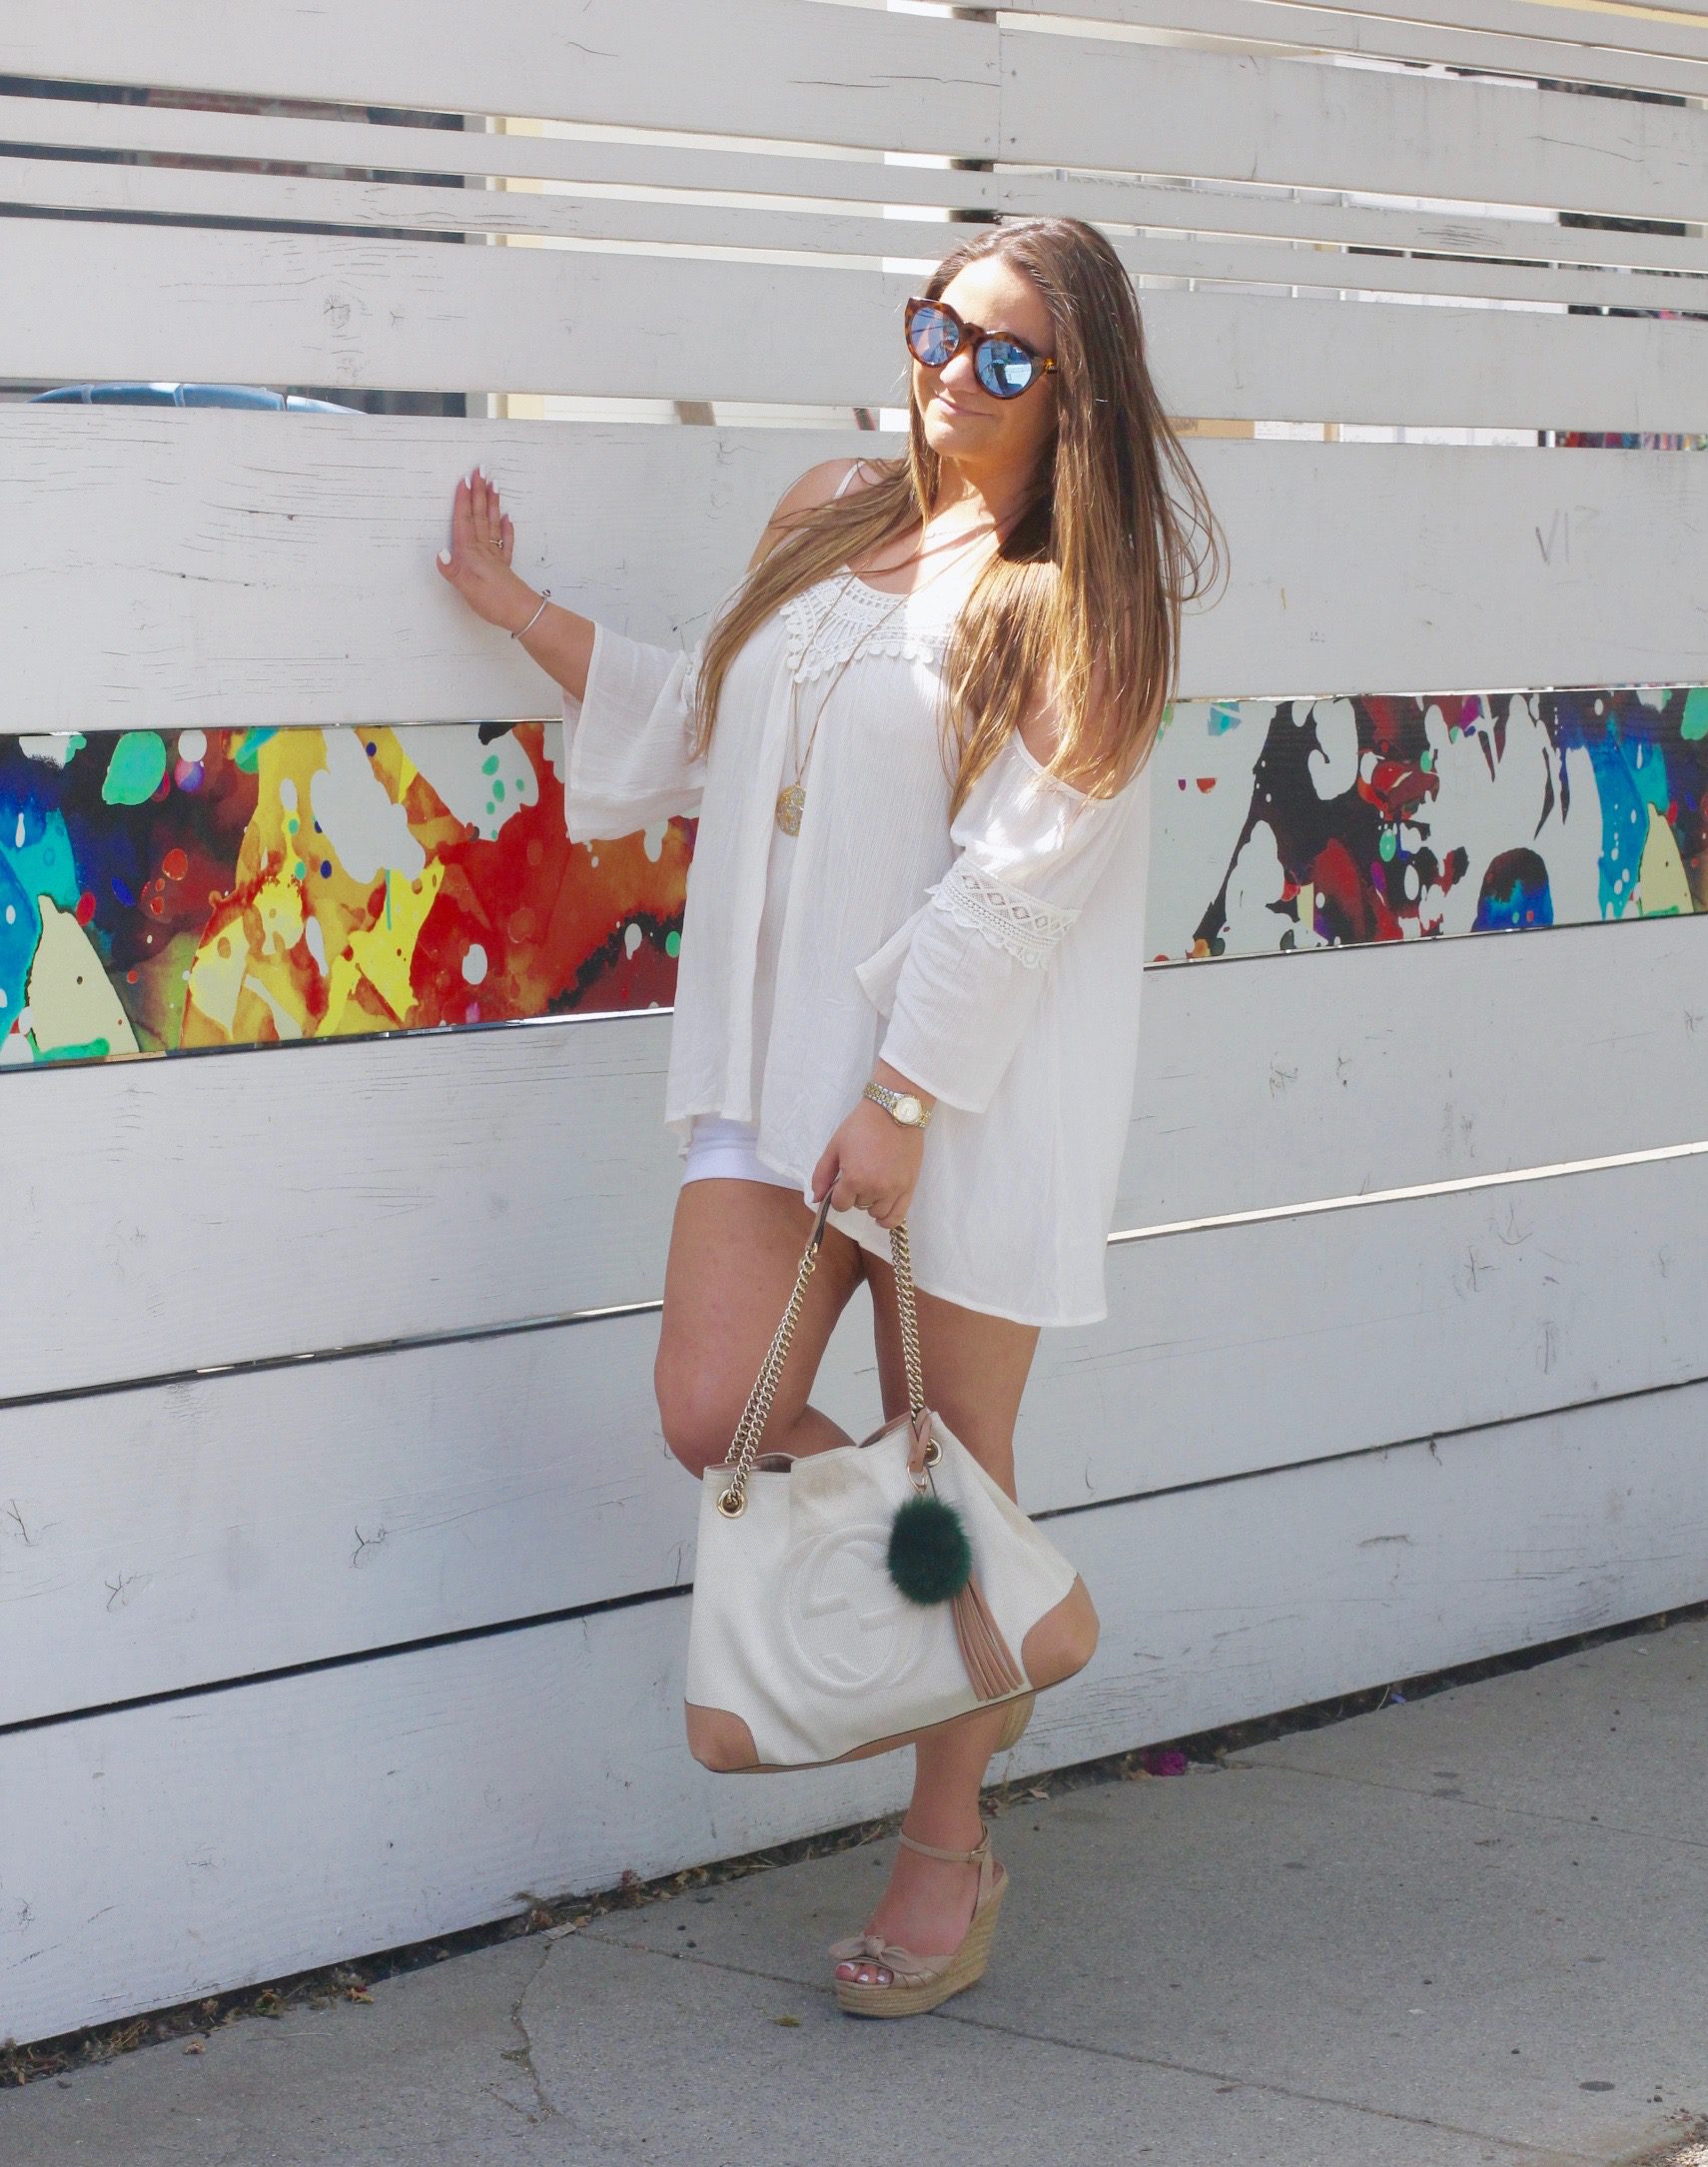 missyonmadison, melissa tierney, fashion blogger, fashion blog, style blog, style blogger, la blogger, cold shoulder top, off the shoulder top, target, target style, summer style, summer 2015 trends, summer trends, summer 2016 style, espadrille wedges, nude espadrille wedges, gucci soho bag, green puff keychain, pom pom keychain, white gucci soho bag, le specs necklace, le specs sunglasses, white cotton shorts,